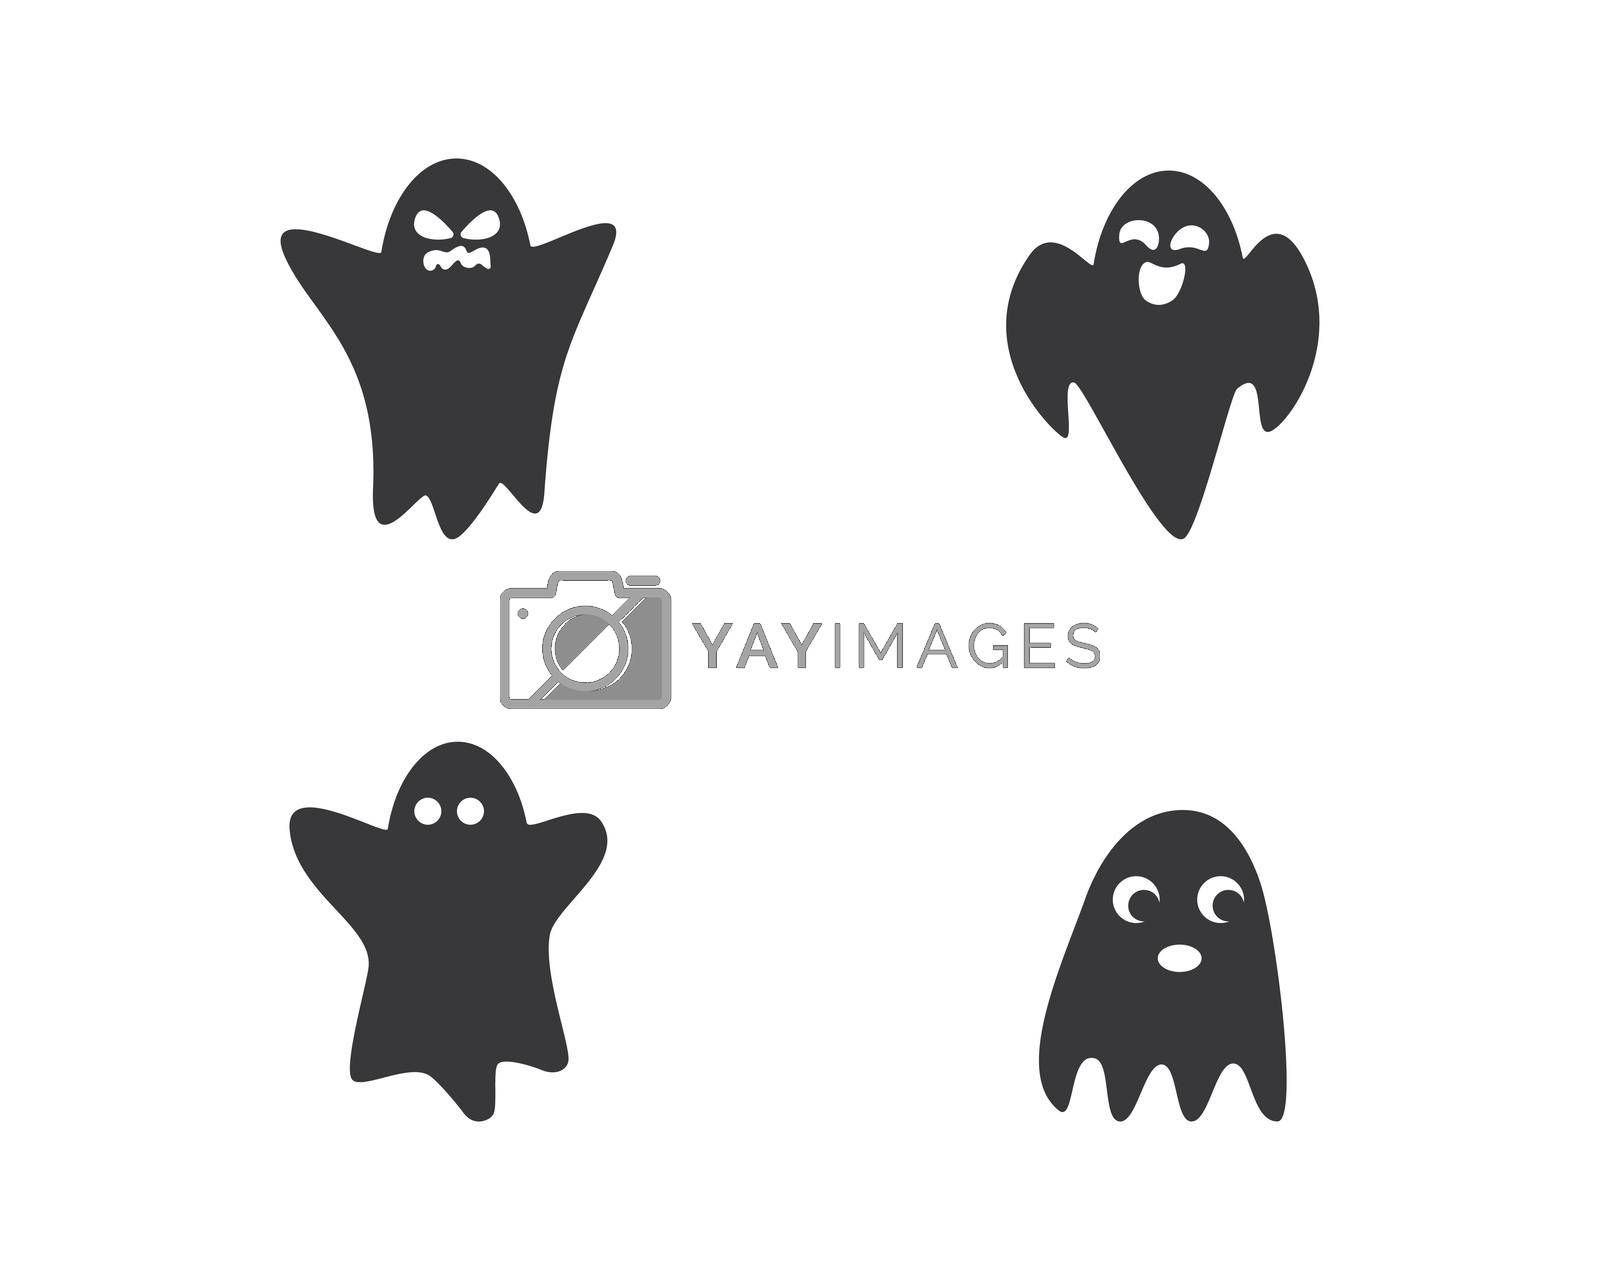 Royalty free image of Ghost ilustration by awk